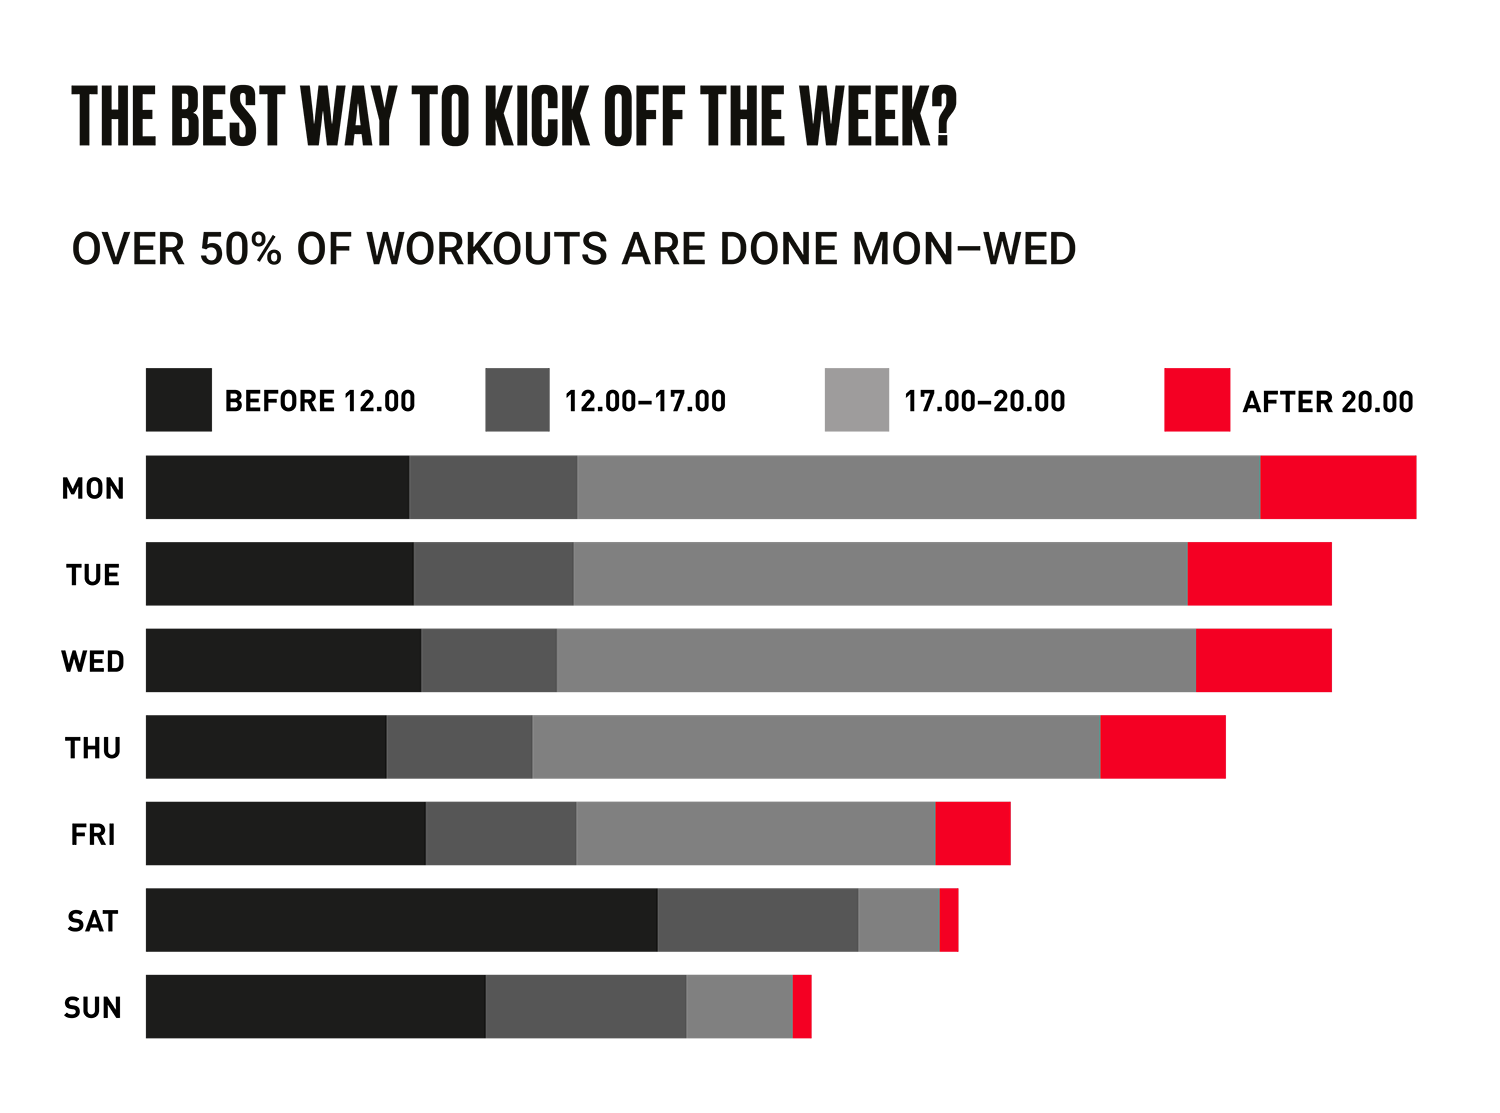 Heart rate data from LES MILLS™ workouts | Infographic | Polar Blog